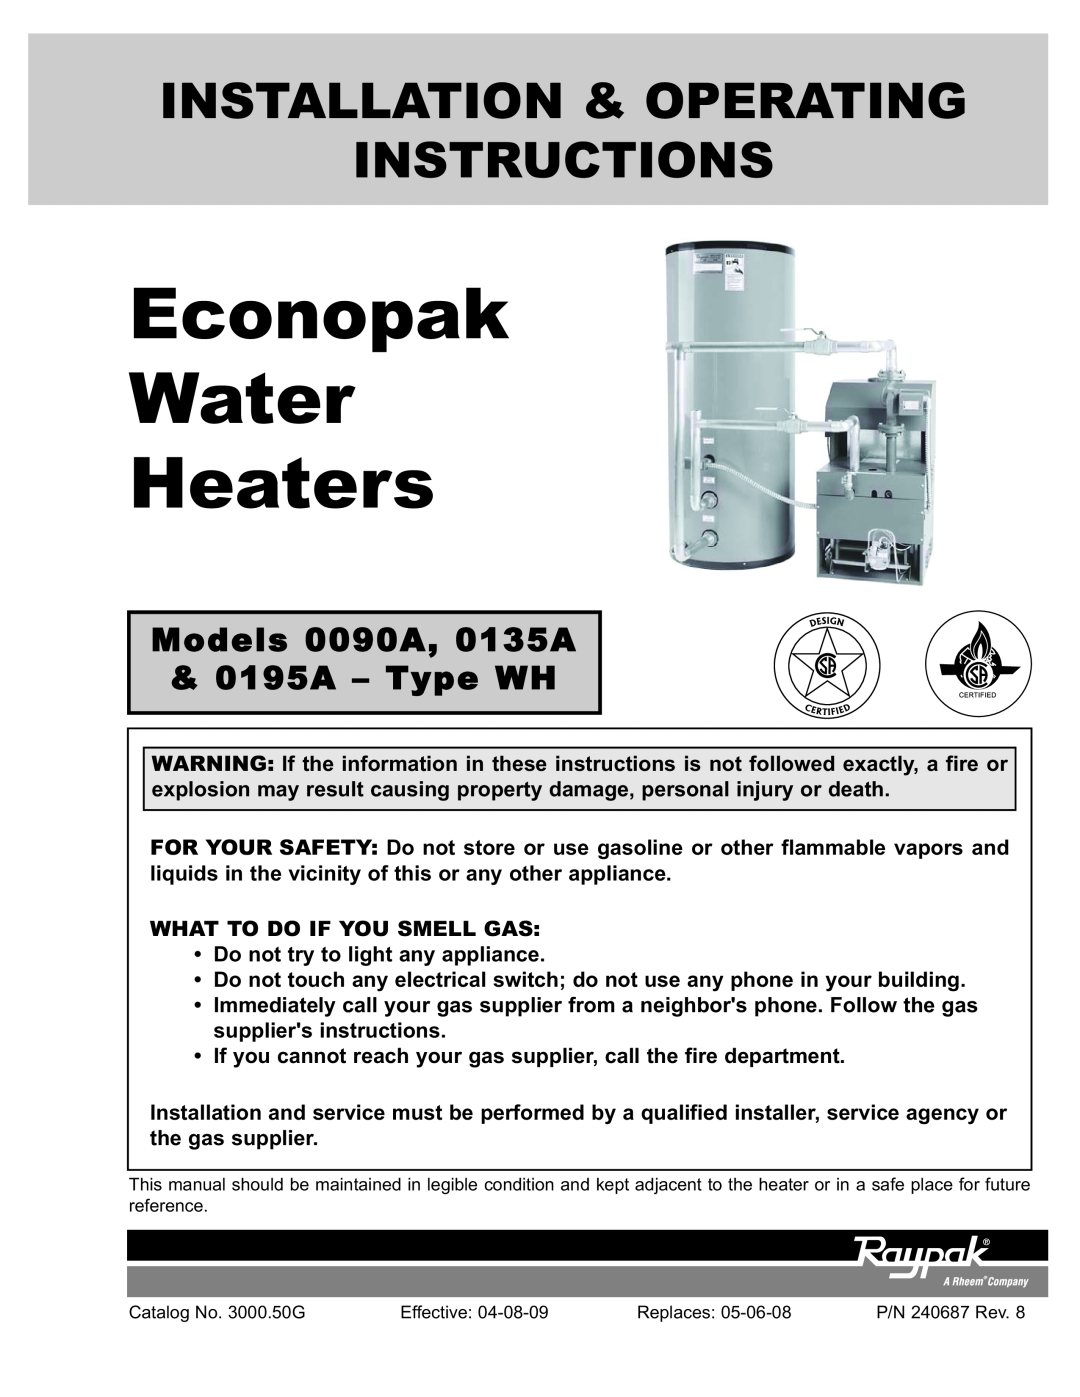 Raypak operating instructions Models 0090A, 0135A & 0195A - Type WH, Econopak Water Heaters 